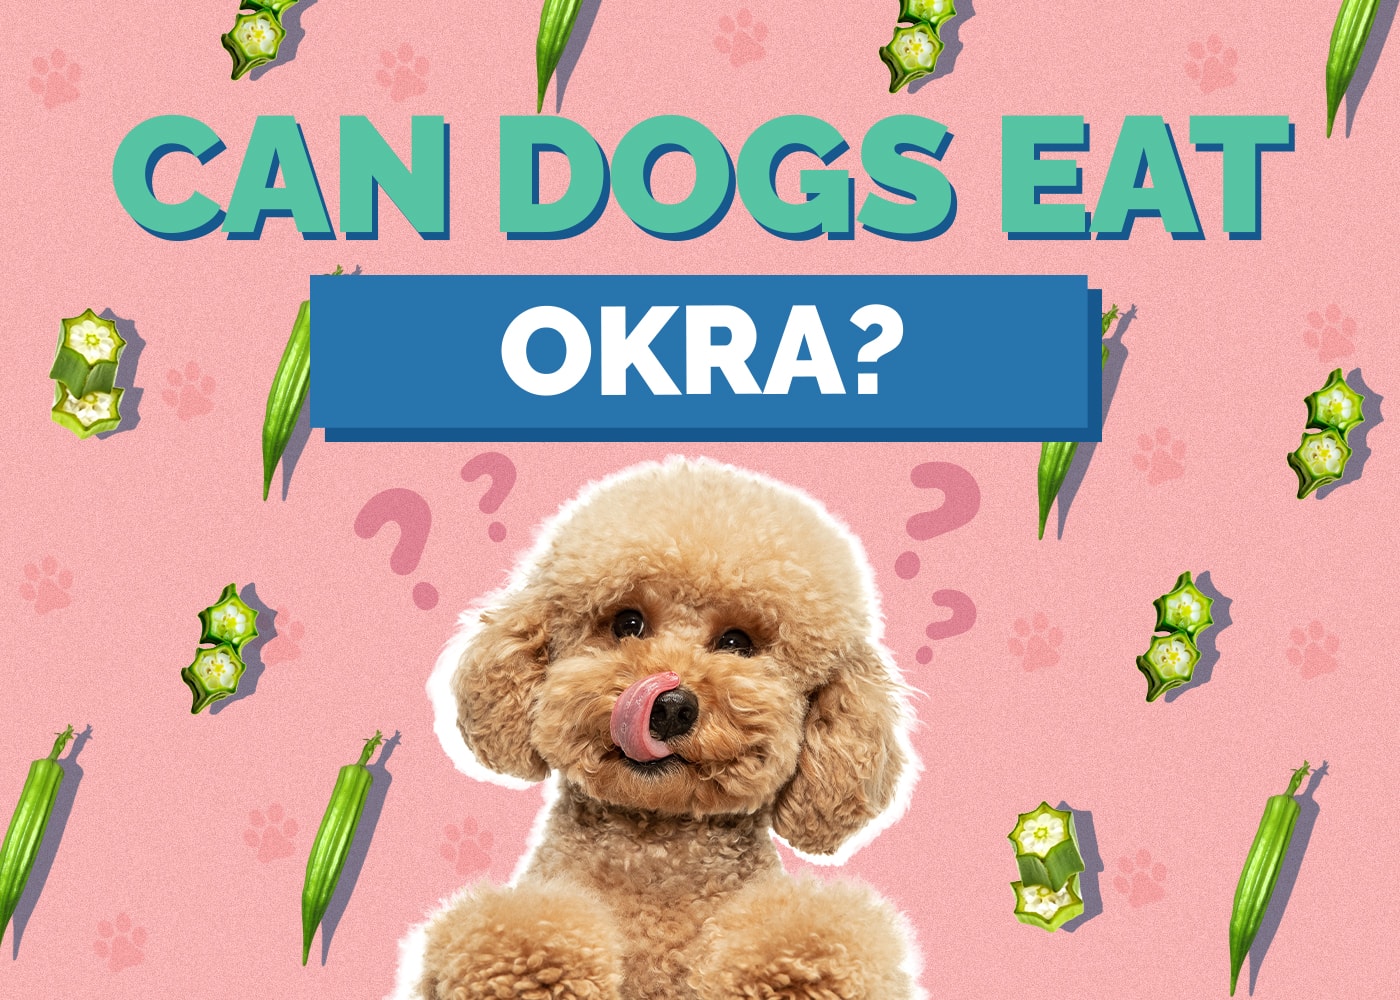 Can Dogs Eat okra